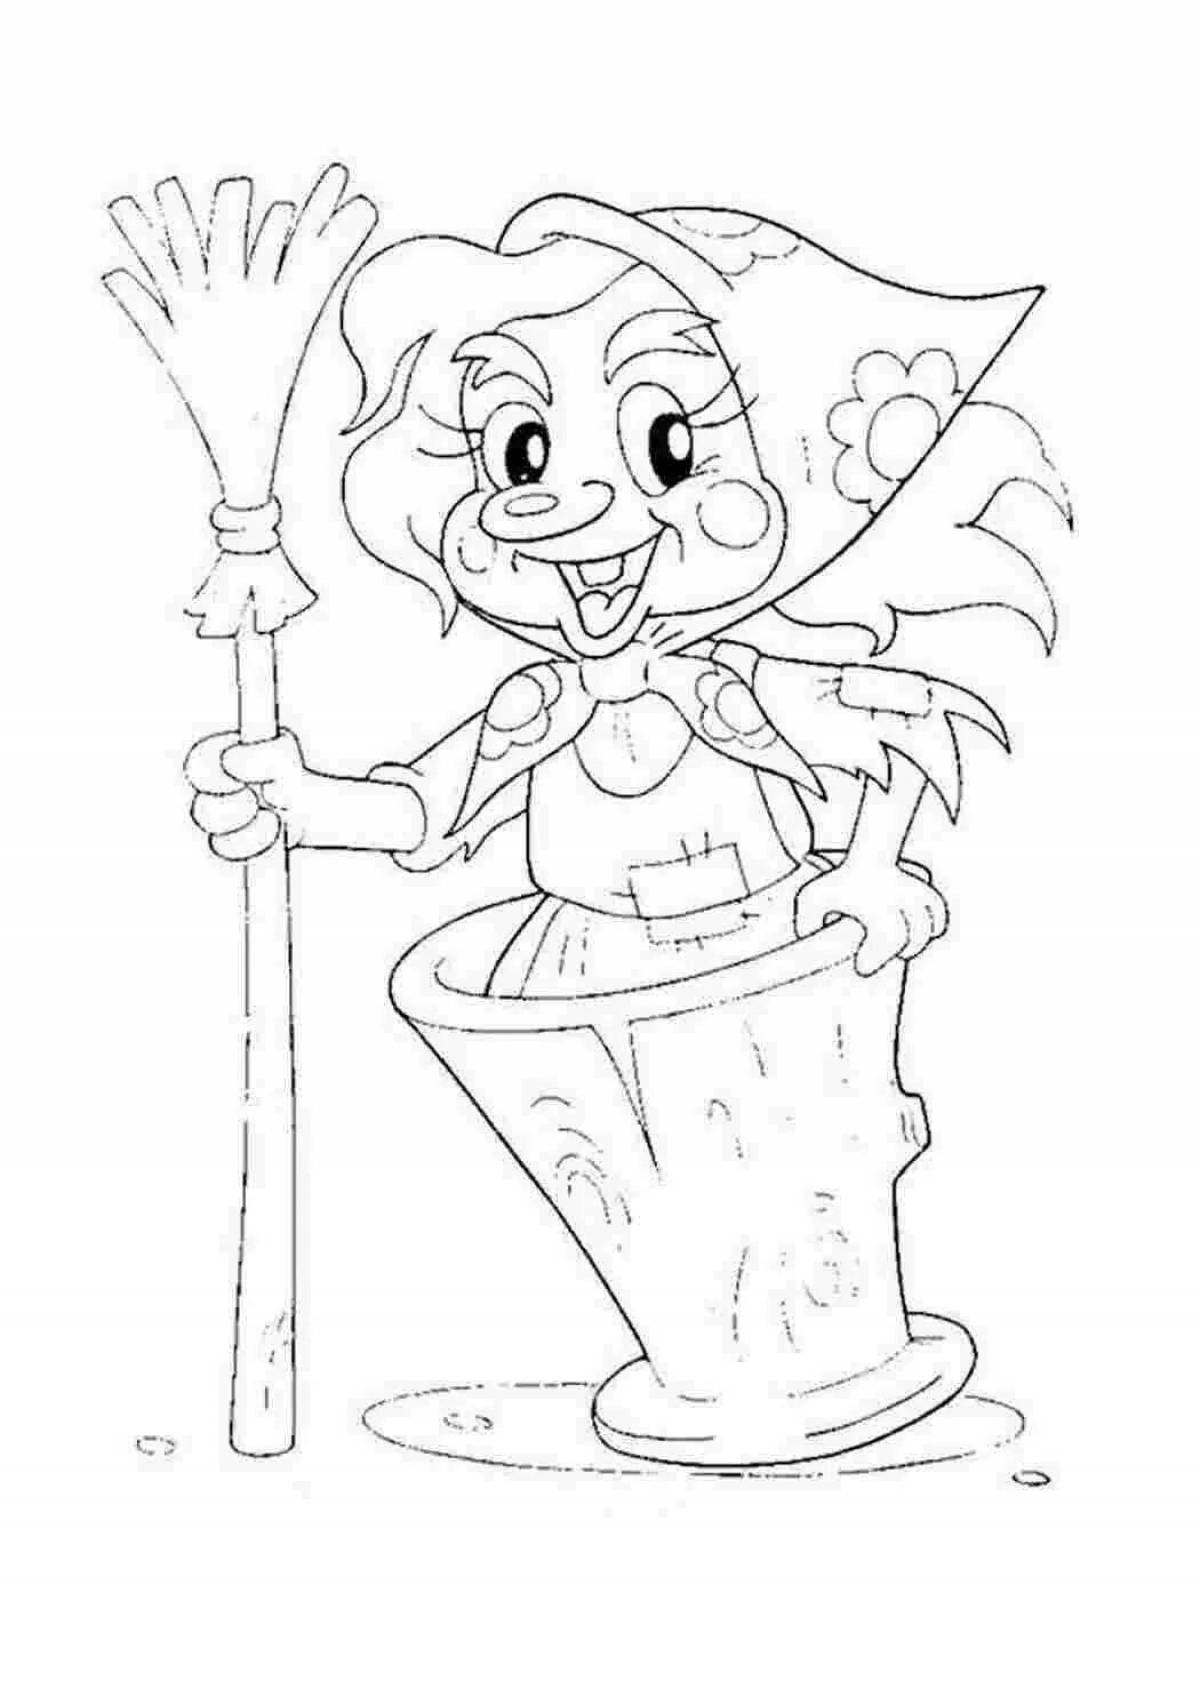 Animated granny hedgehog coloring page